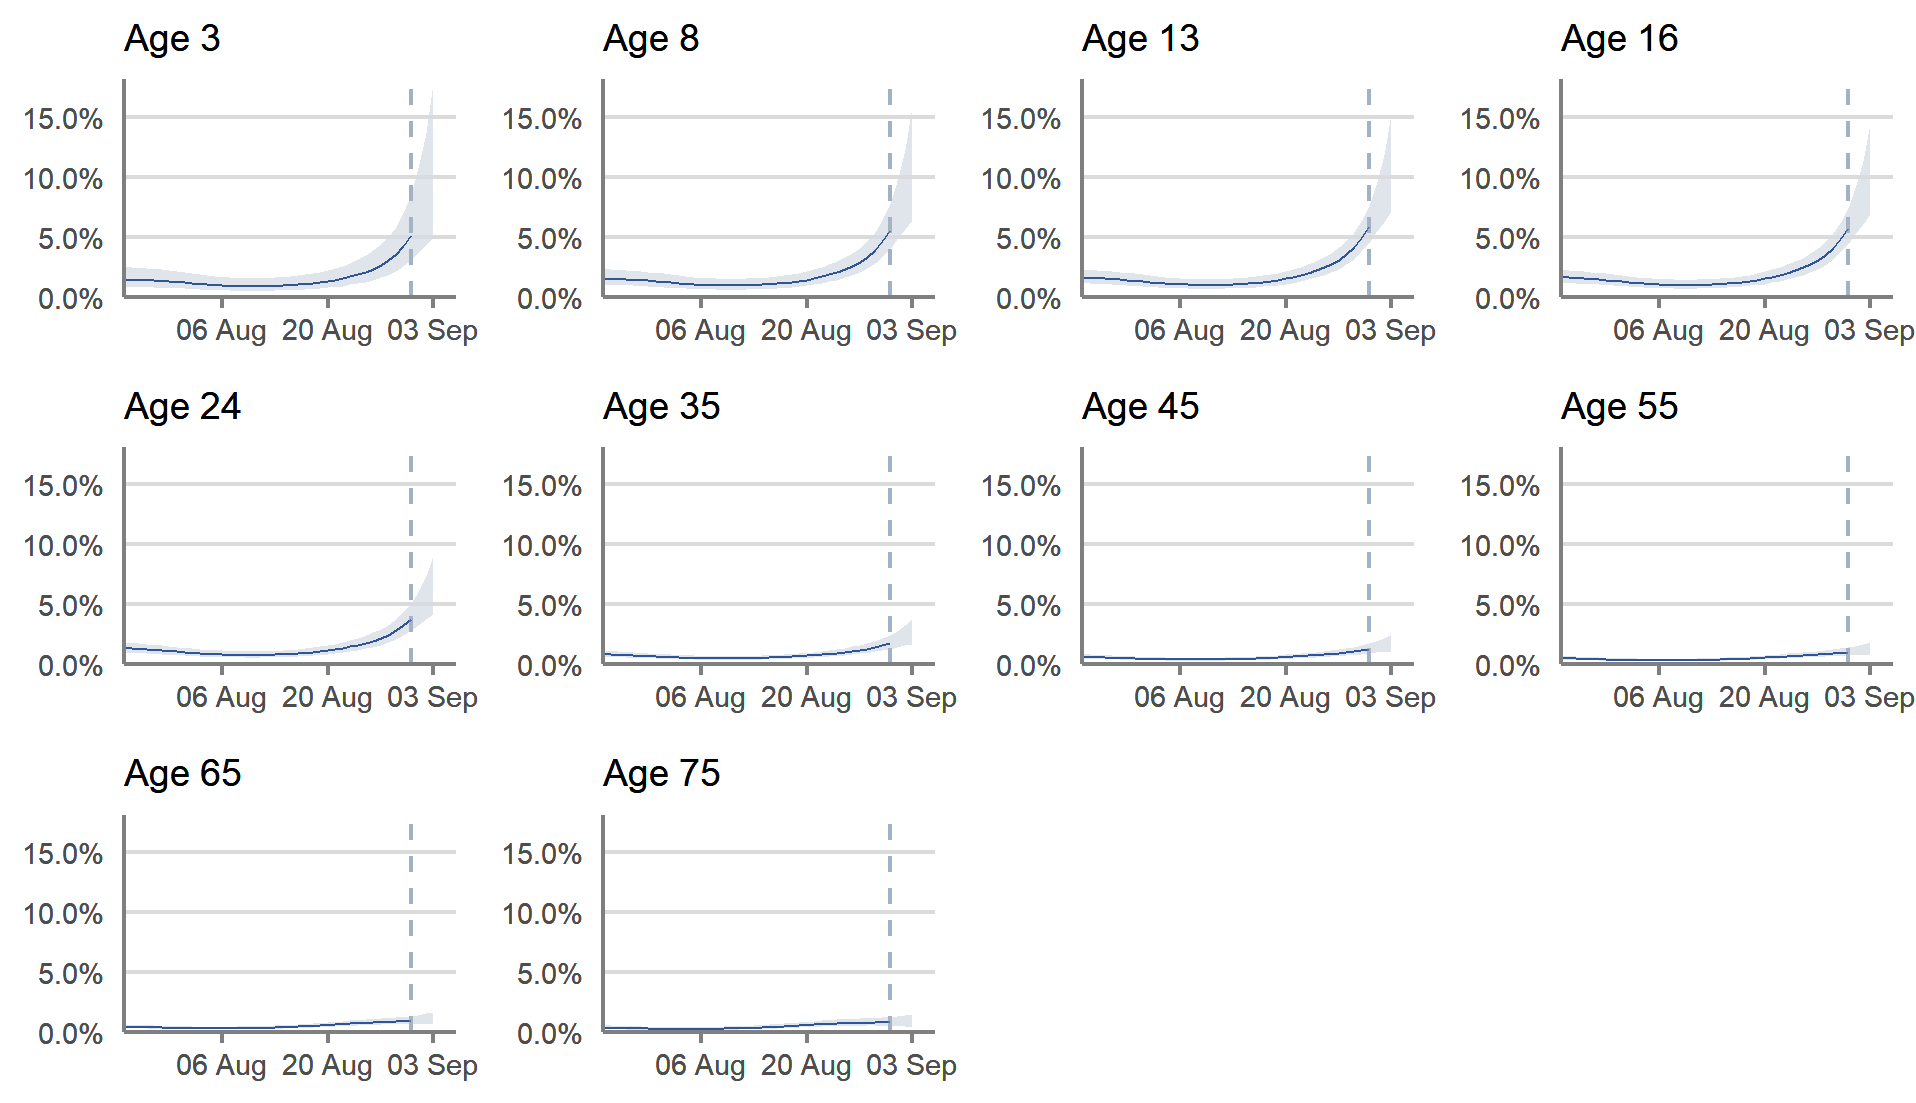 Figure 3: Modelled daily estimates of the percentage of the population in Scotland testing positive for COVID-19, by reference age, between 24 July and 3 September 2021, including 95% confidence intervals (see notes 2,5,6,8)